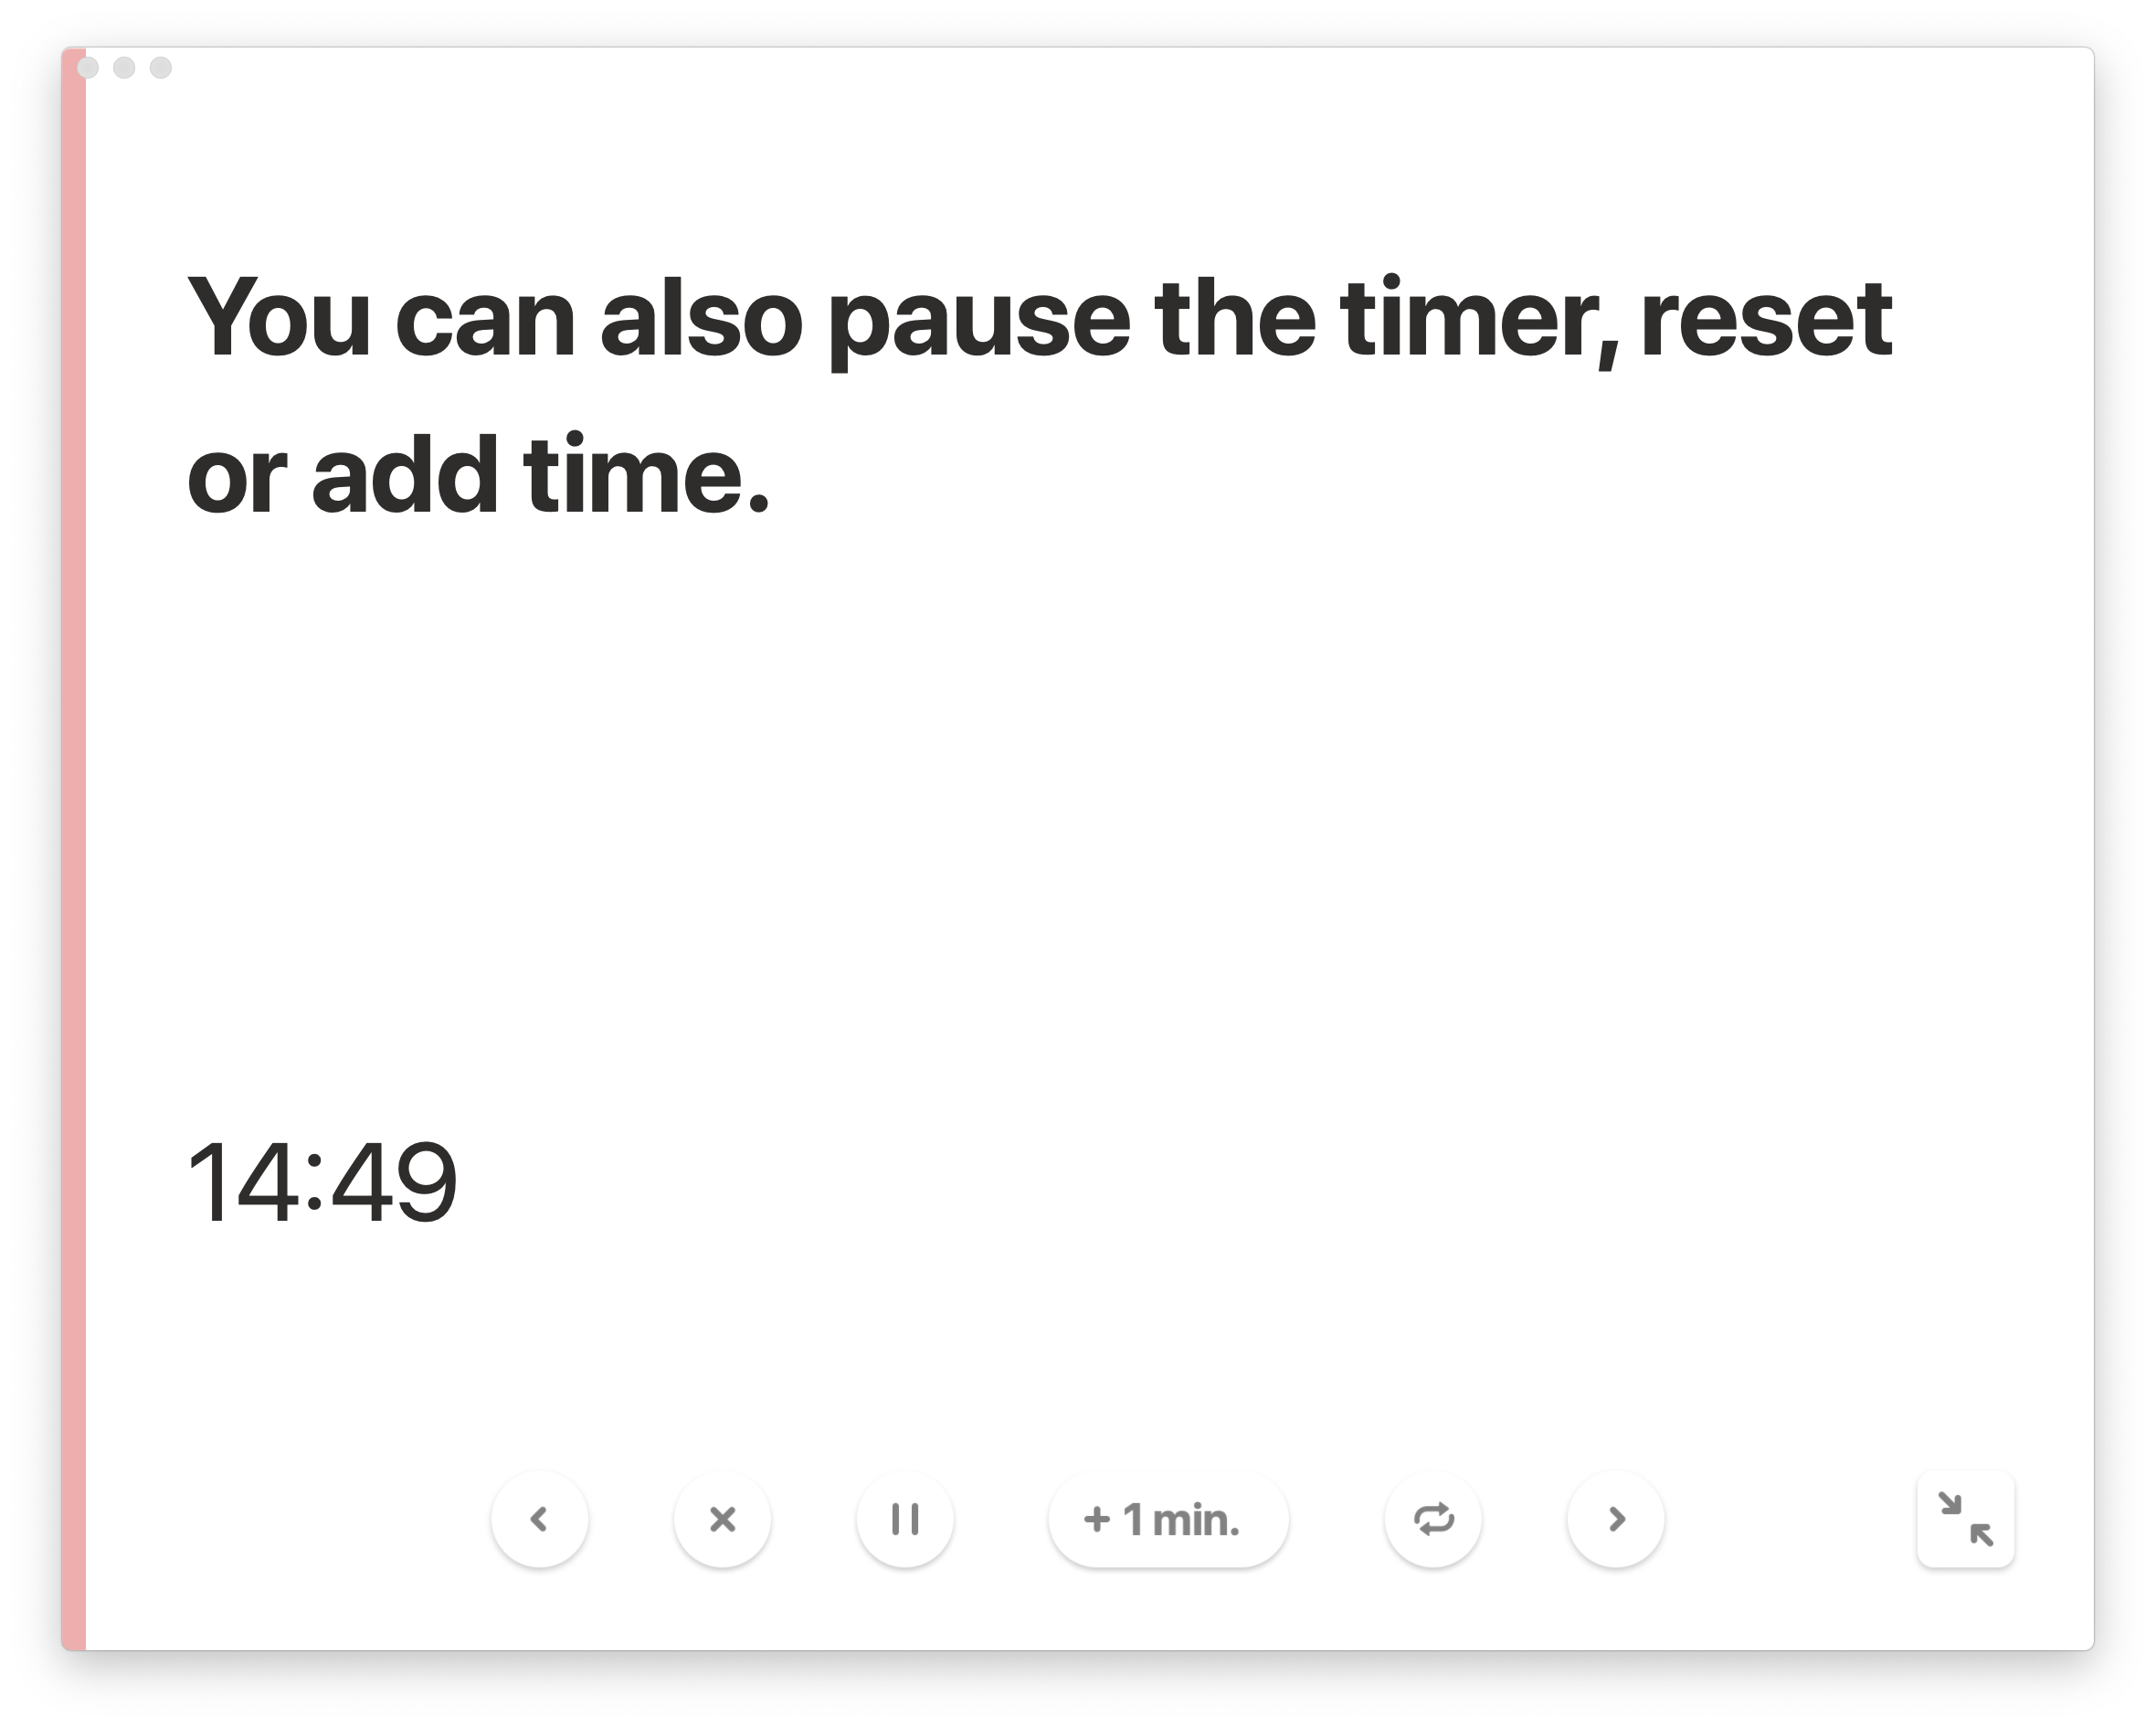 You can also pause, reset or add time.